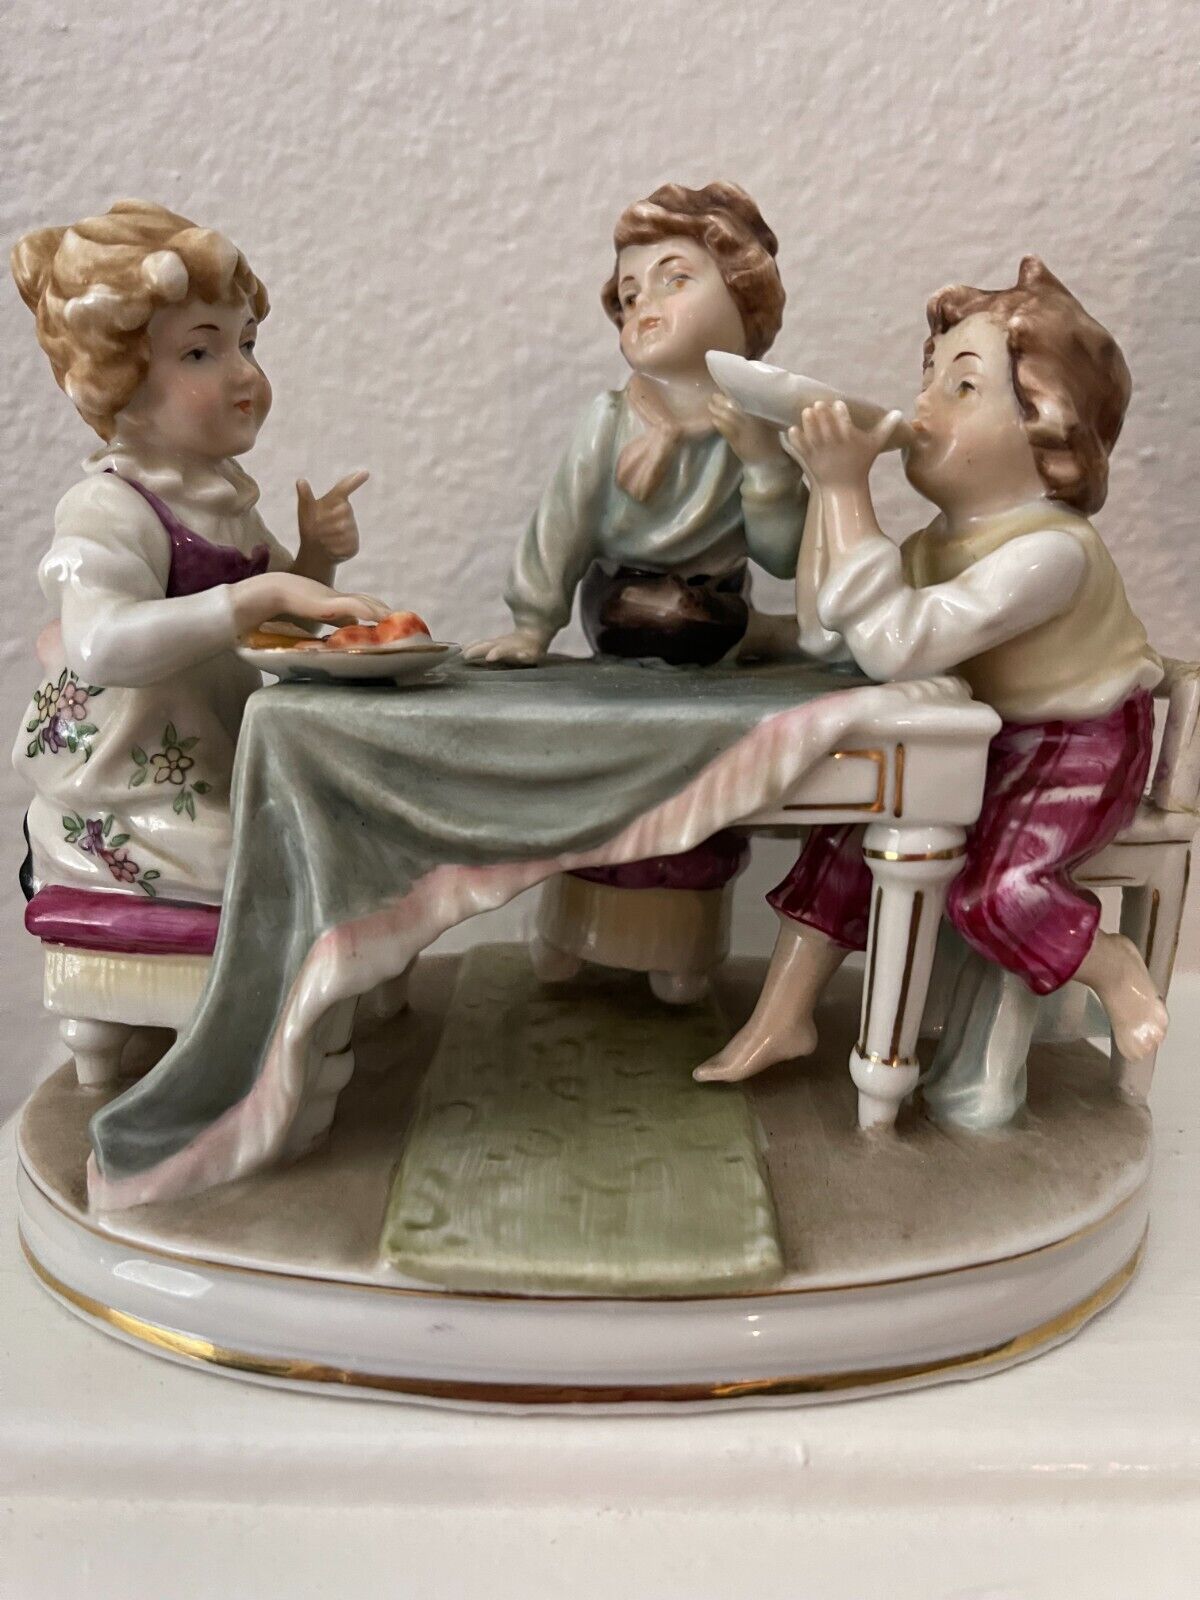  Porcelain Figurine 5.5 - Vintage Children At Table Eating like Scheibe Alsbach